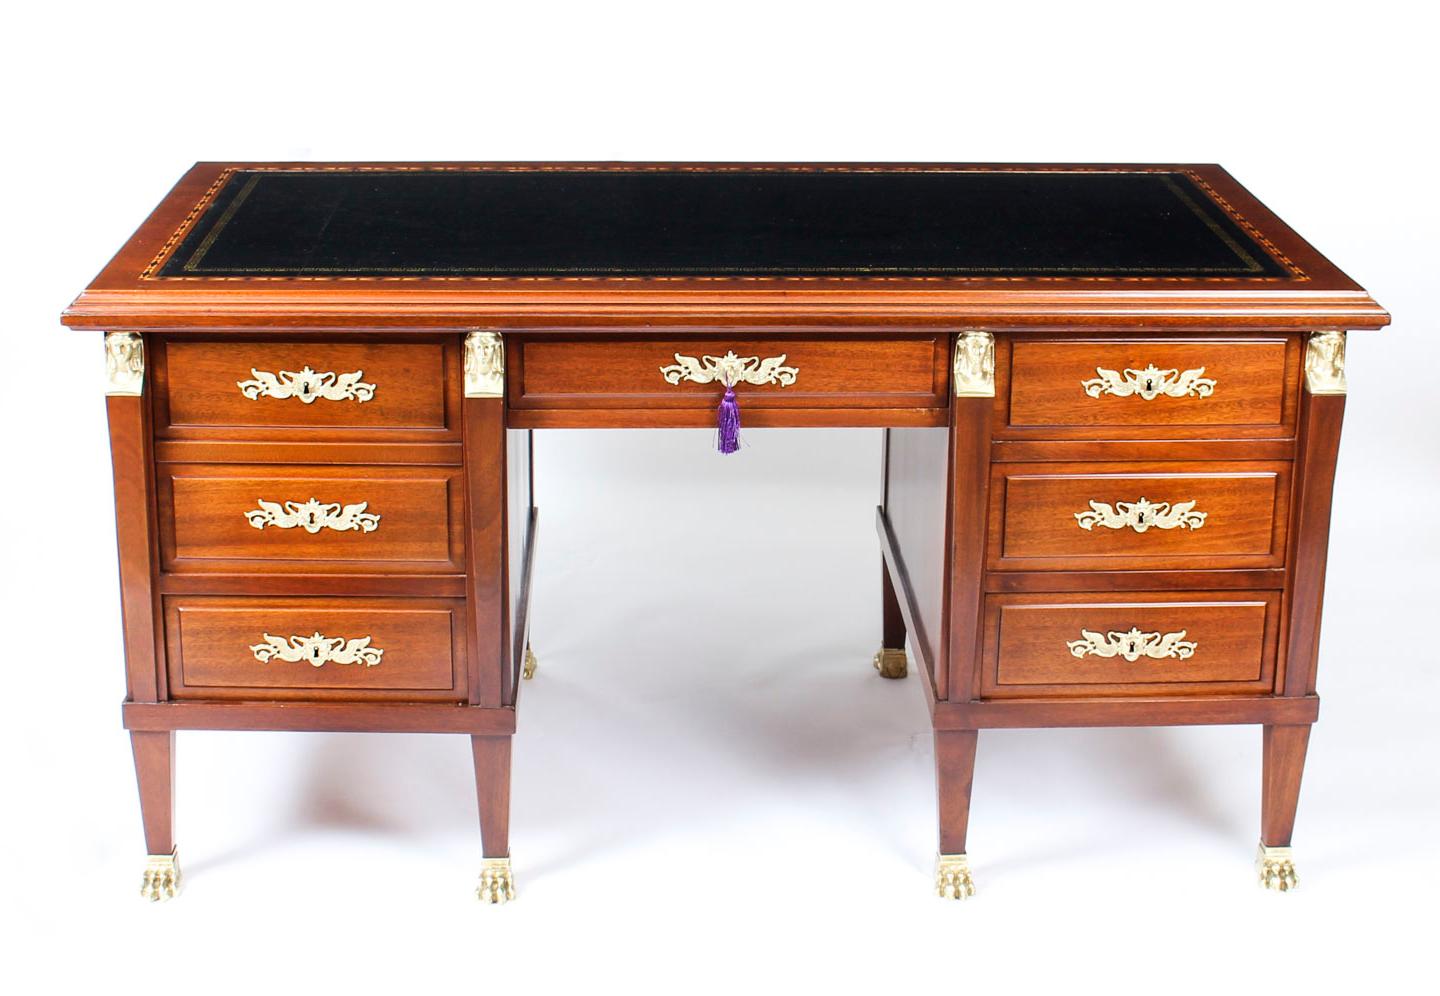 This is an exquisite French Empire Revival pedestal desk, circa 1880 in date.

This desk has been beautifully crafted from flame mahogany. The top has a striking gold tooled black leather inset writing surface which has a decorative geometric inlaid